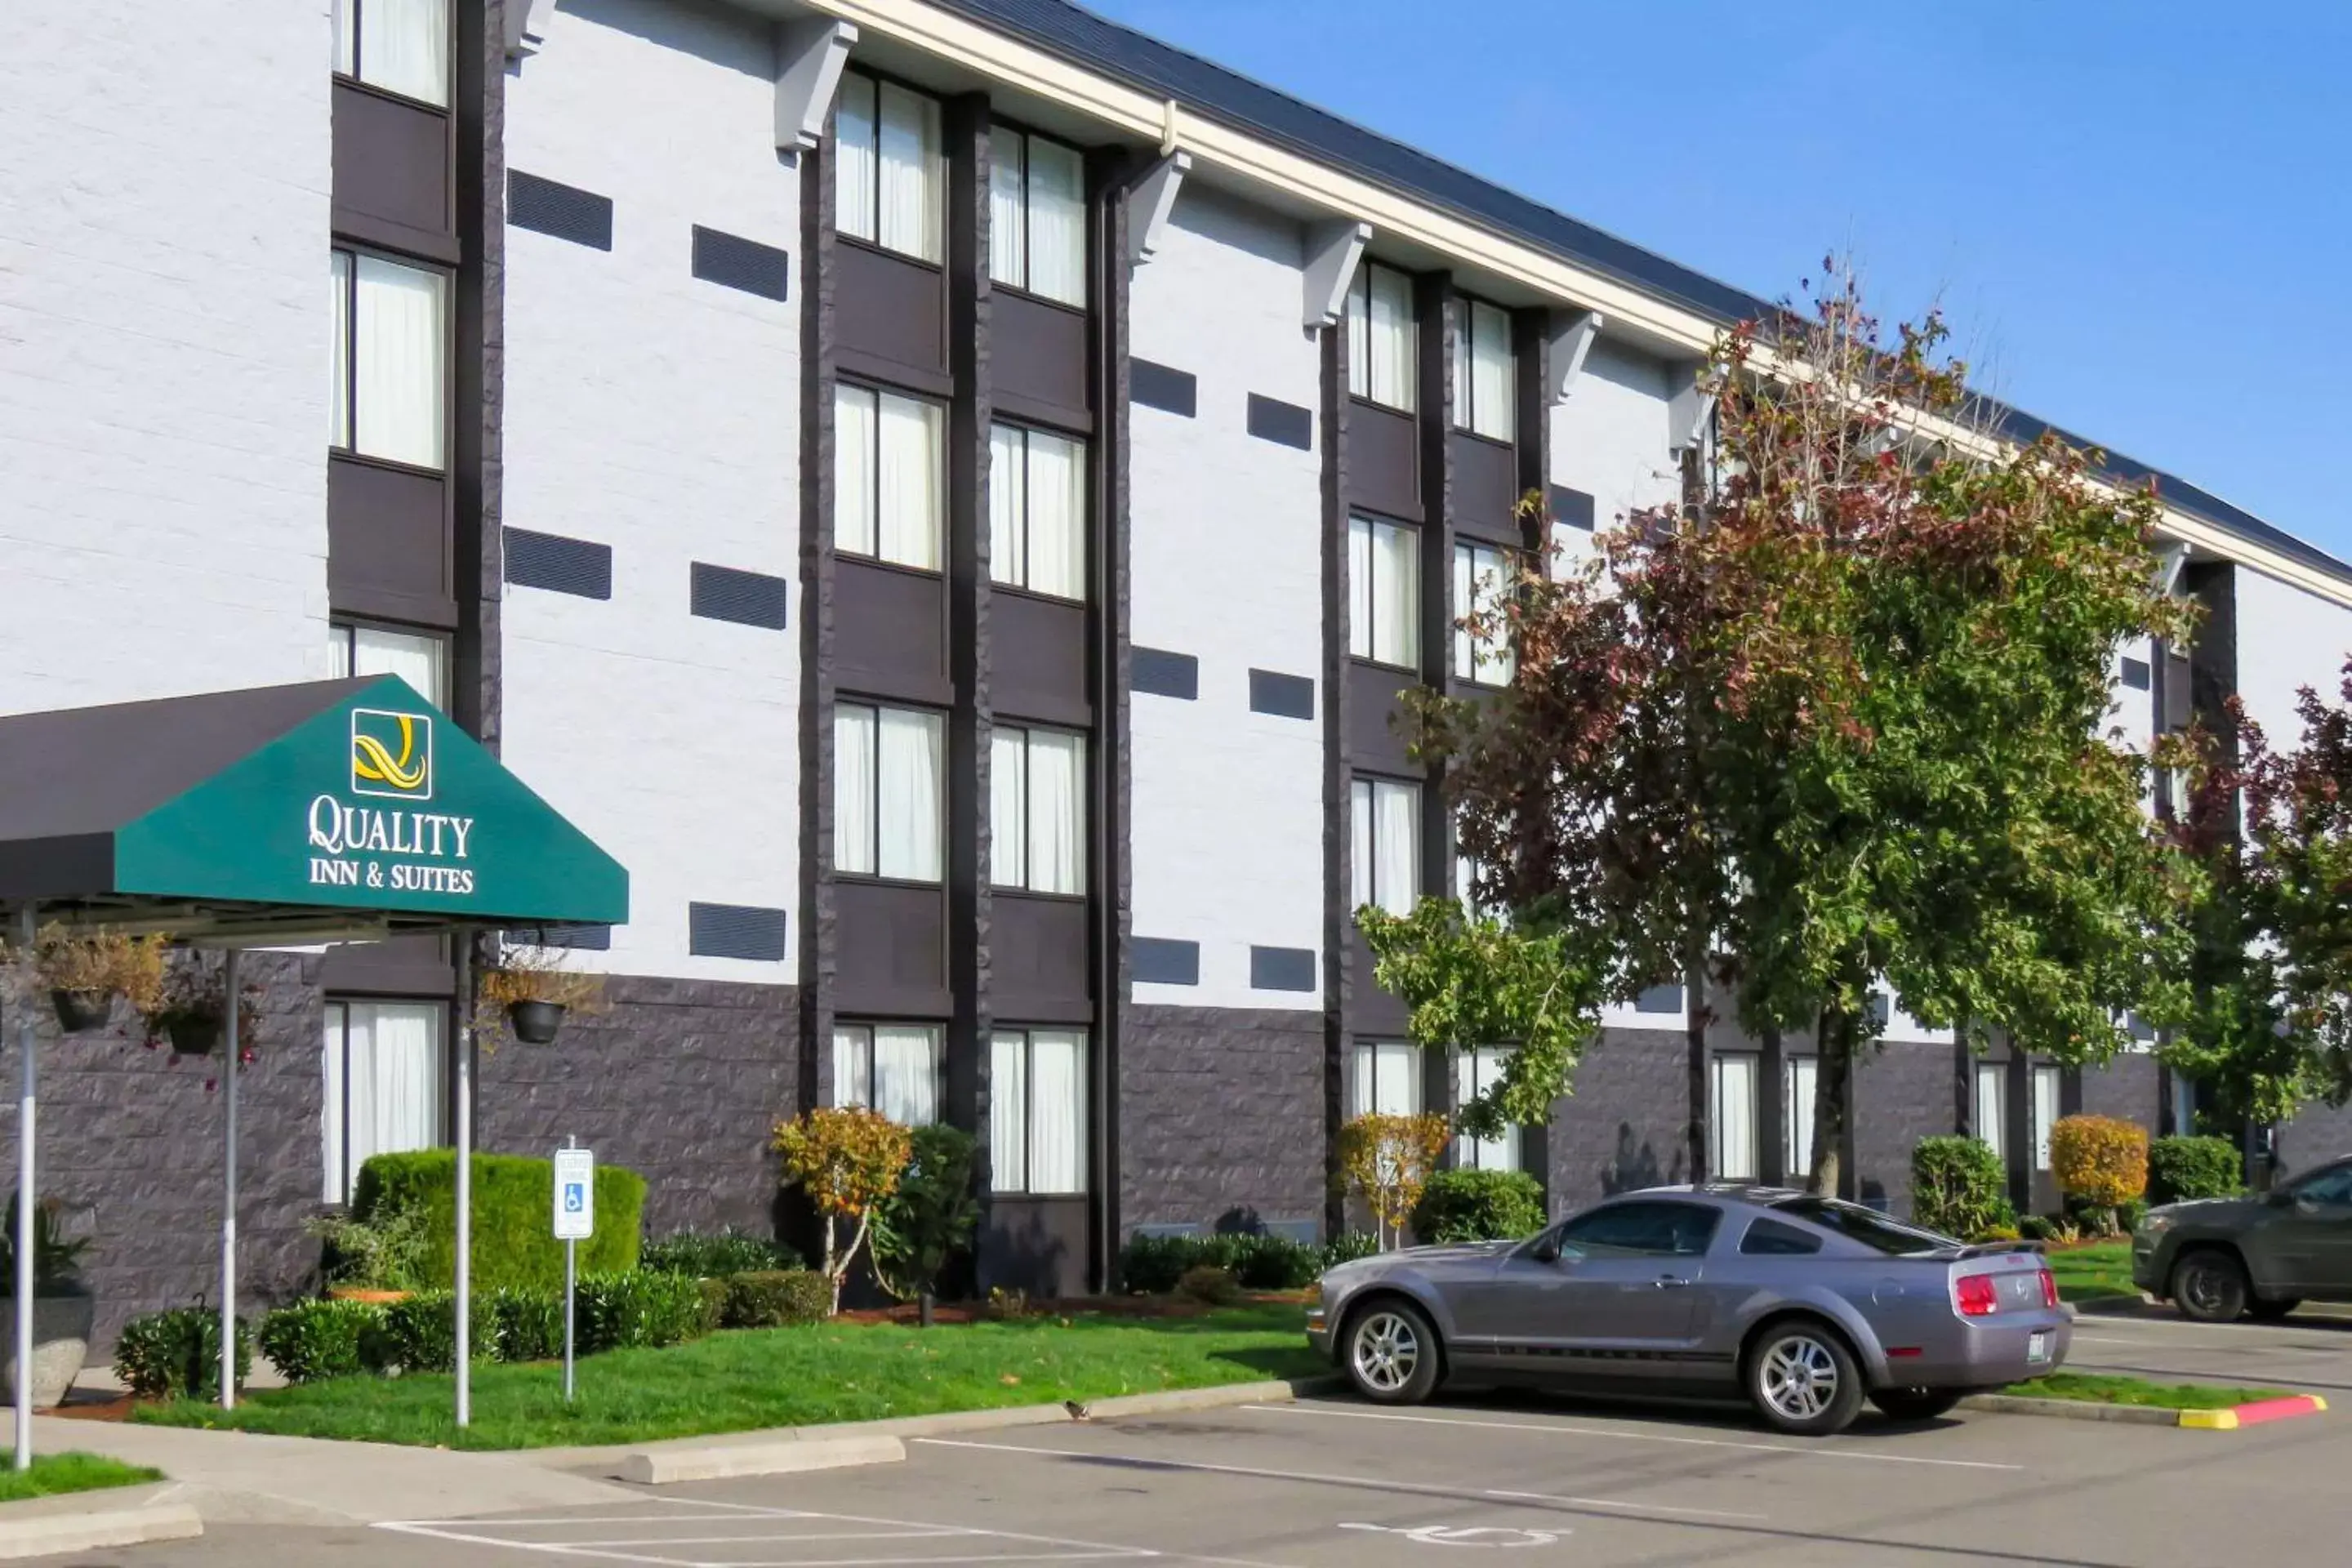 Property Building in Quality Inn & Suites Everett